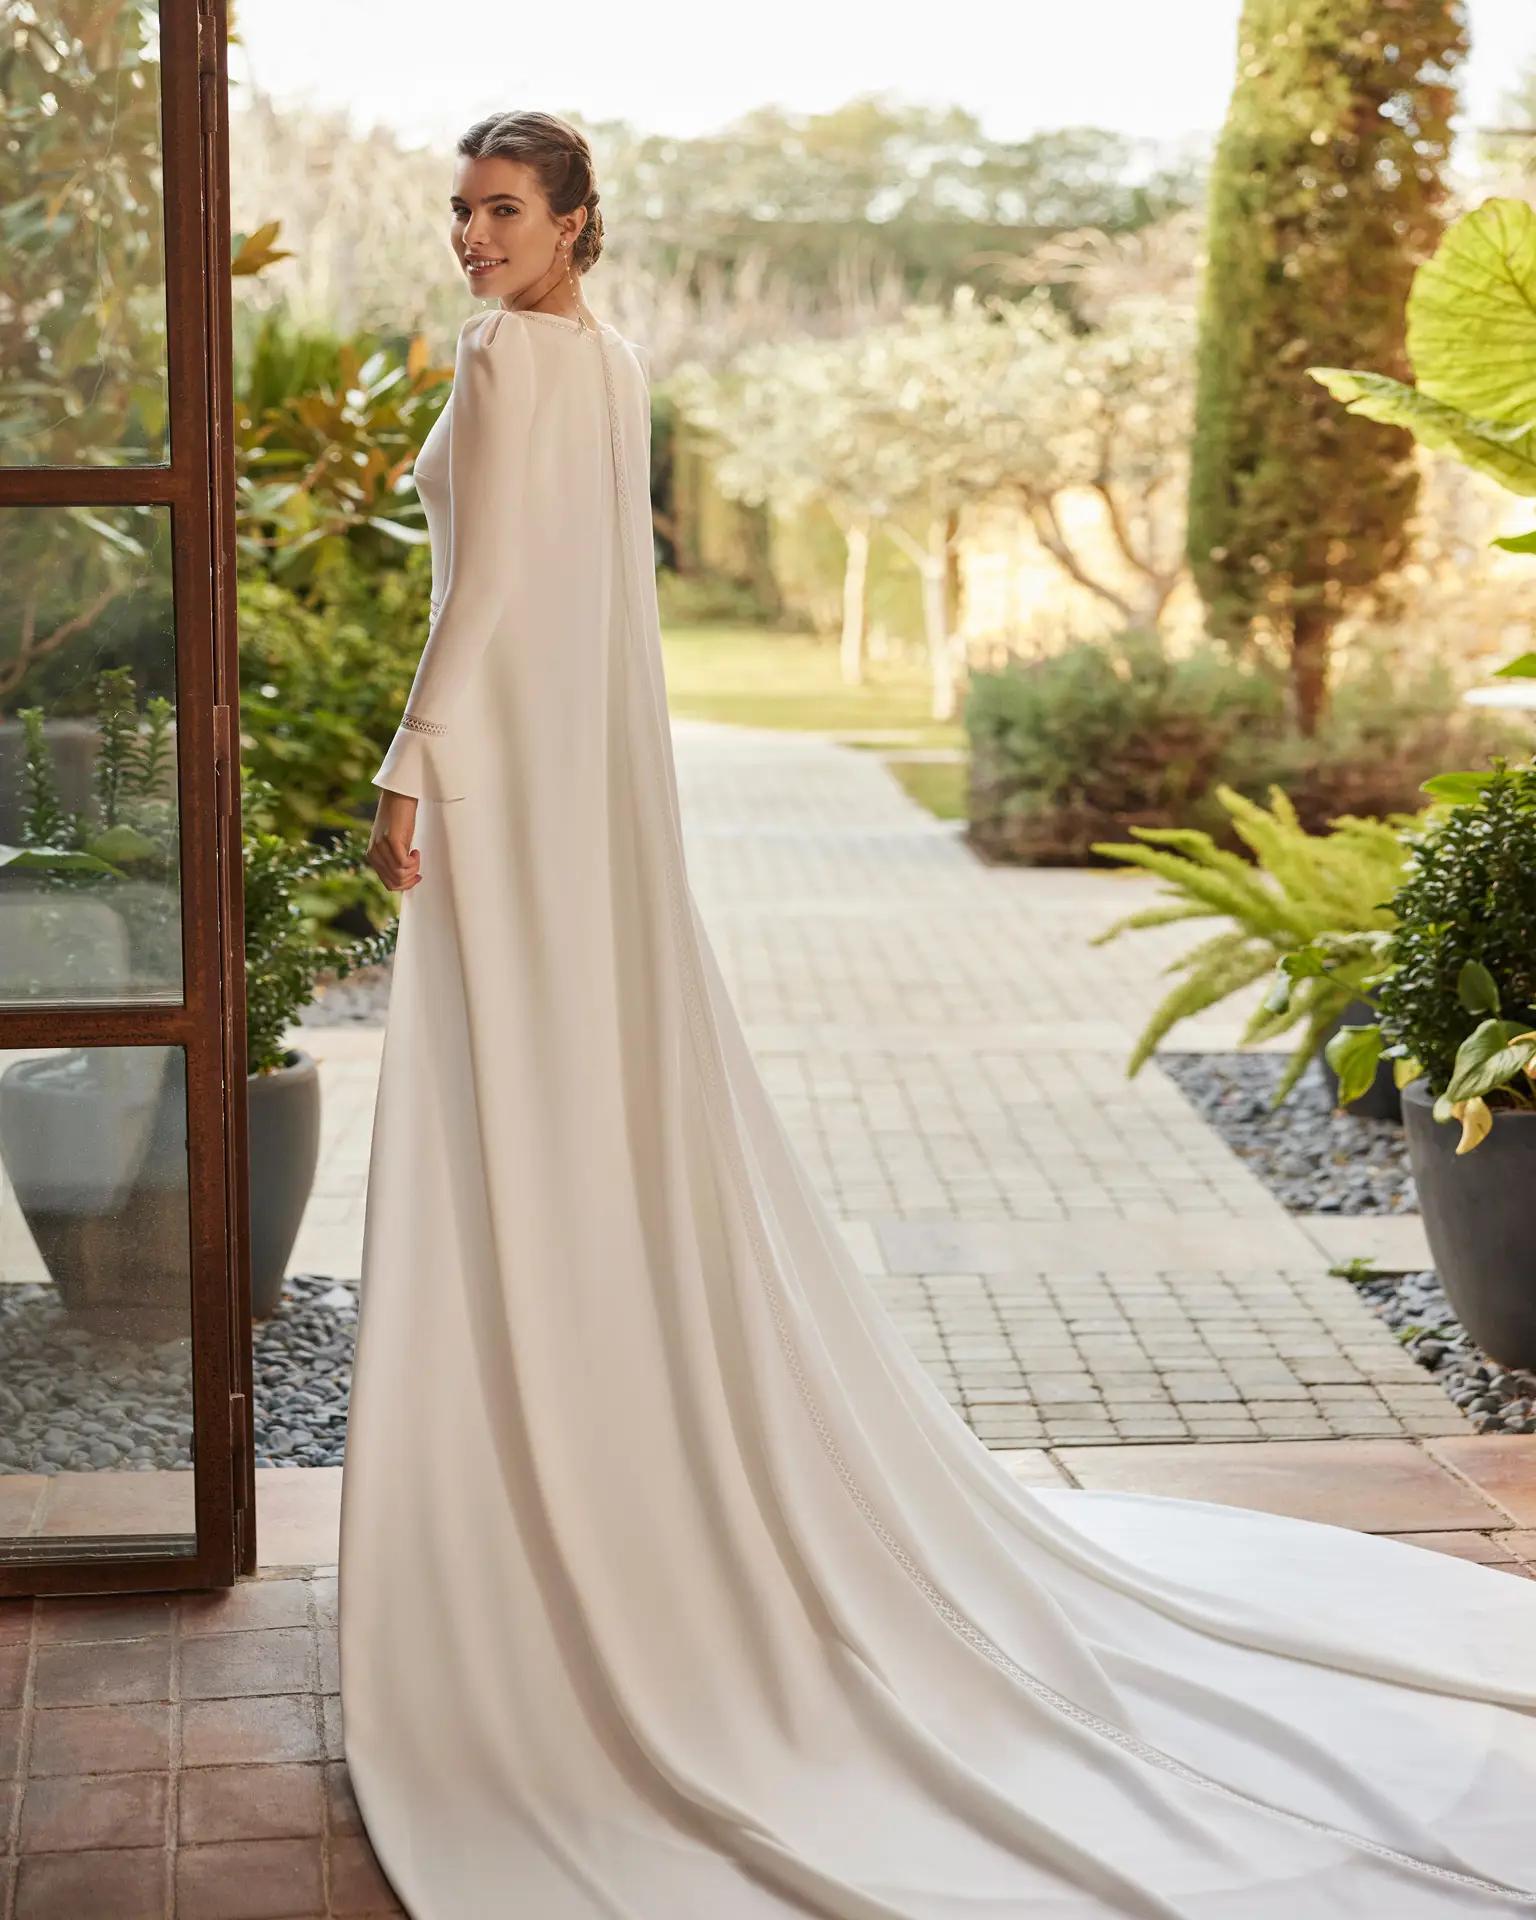 Danesa Rosa Clara cape with sleeves for a regal bridal look in Columbus, Ohio